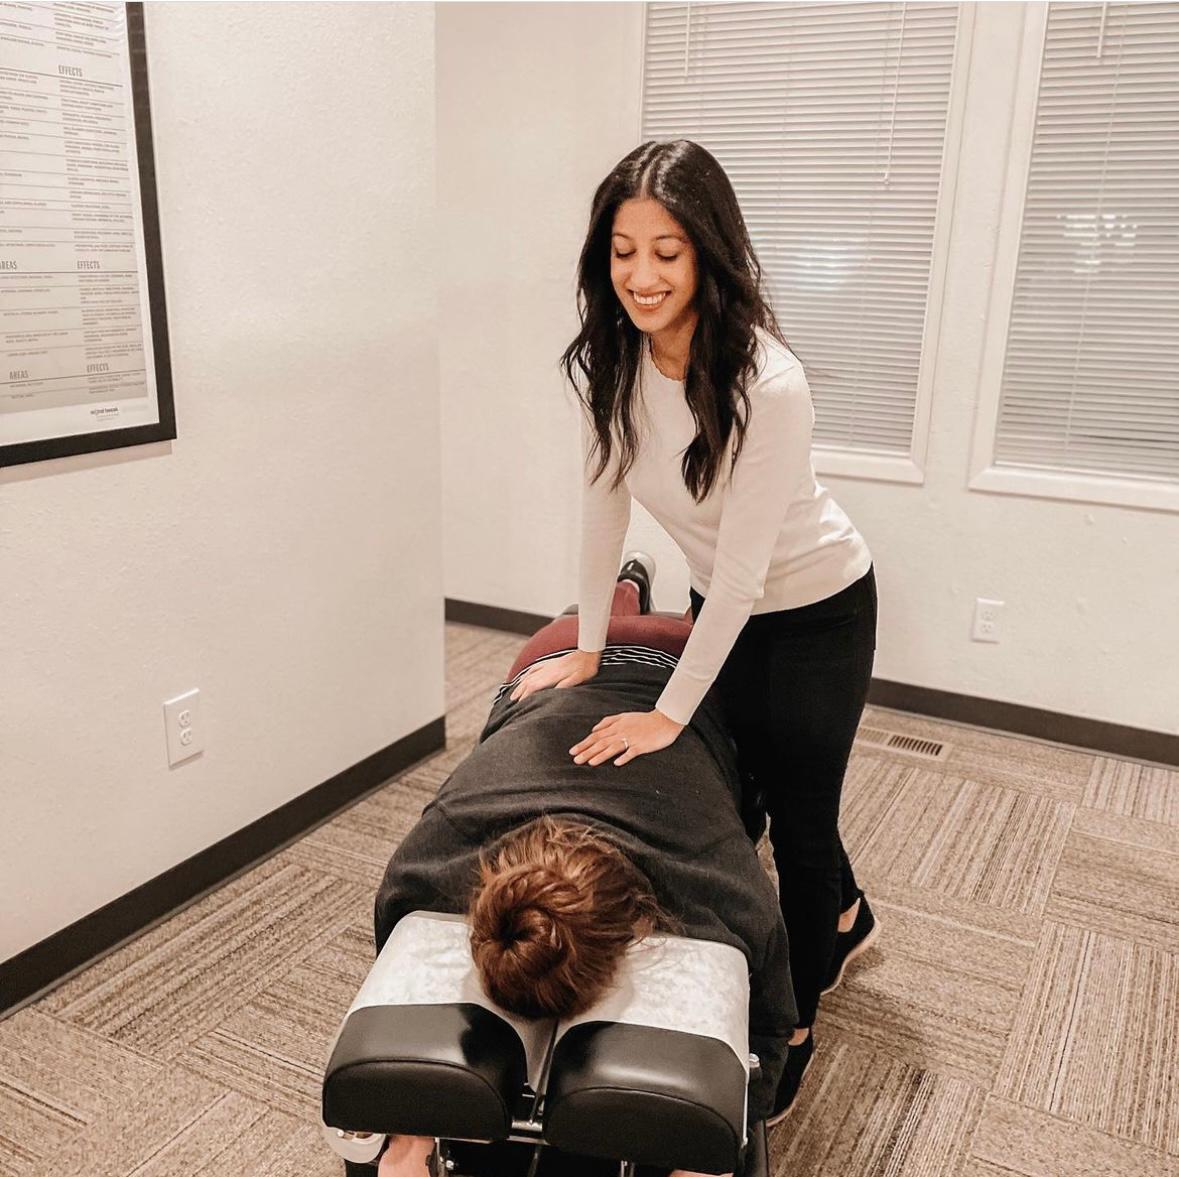 Chiropractic Adjustment at Elevation Spine Center's Chiropractic Office in Bend, Oregon